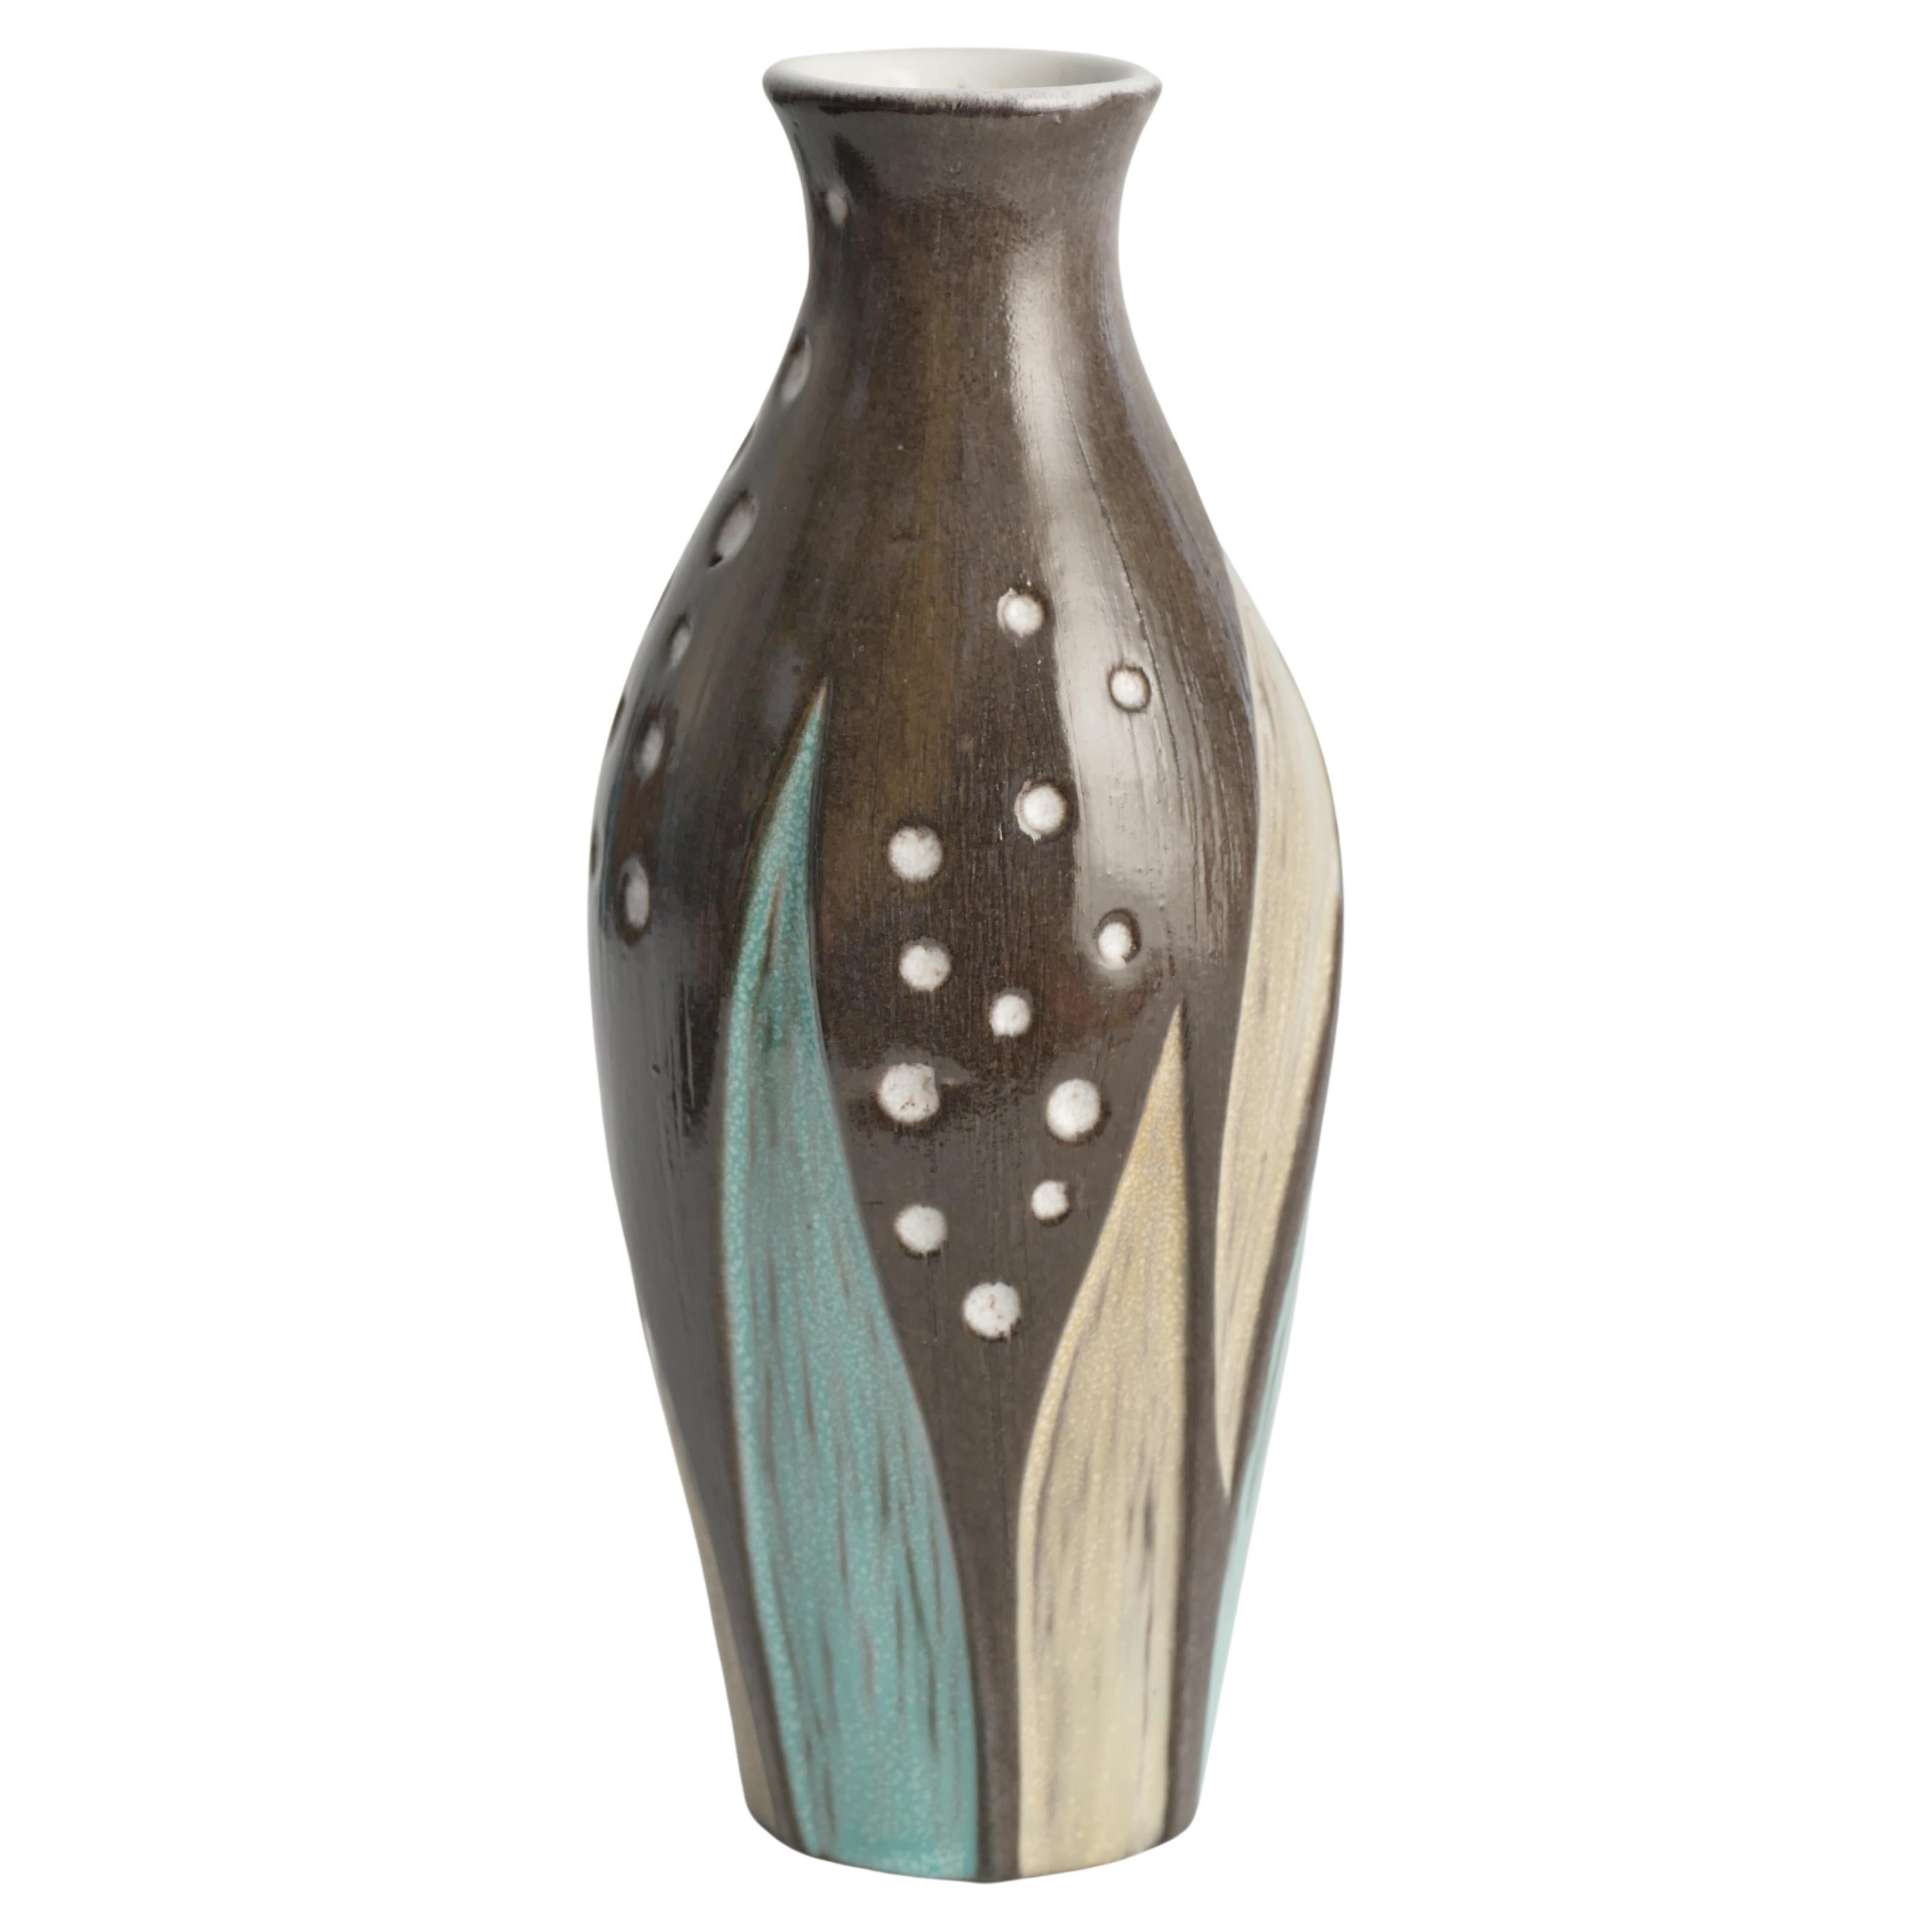 Ceramic Vase with Seaweed Motif by Mari Simmulson for Upsala Ekeby, Sweden 1950s For Sale